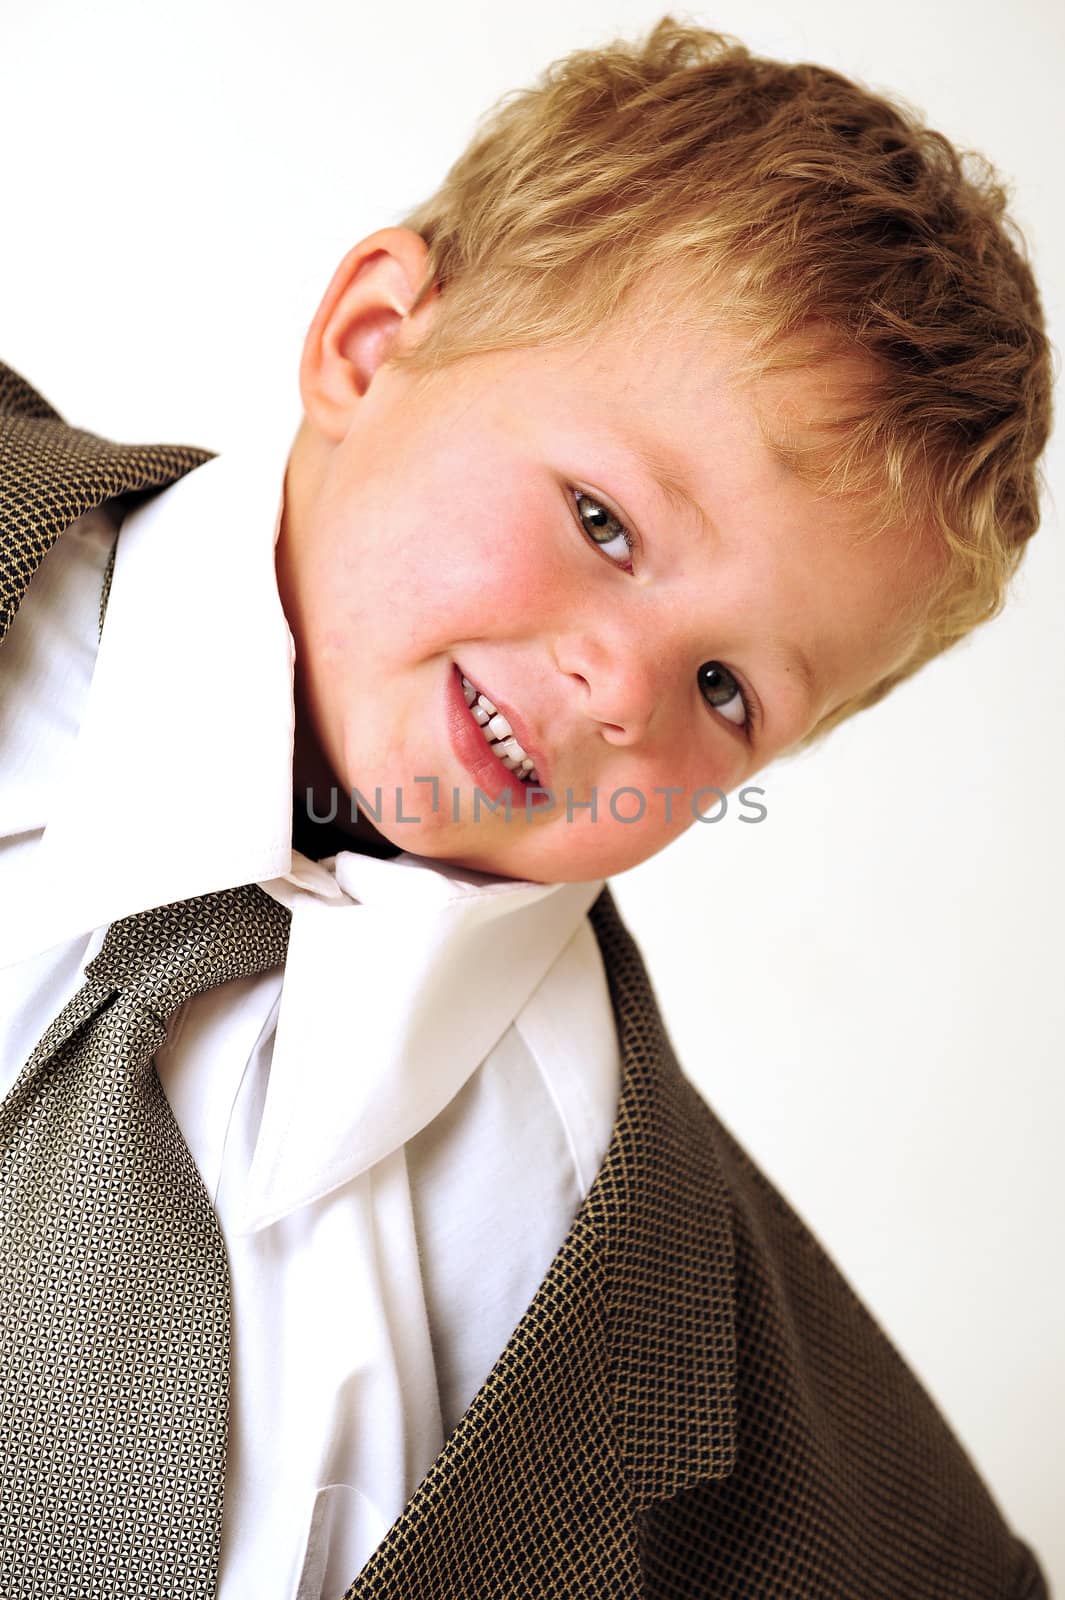 Blond young boy in oversized business clothes smiling